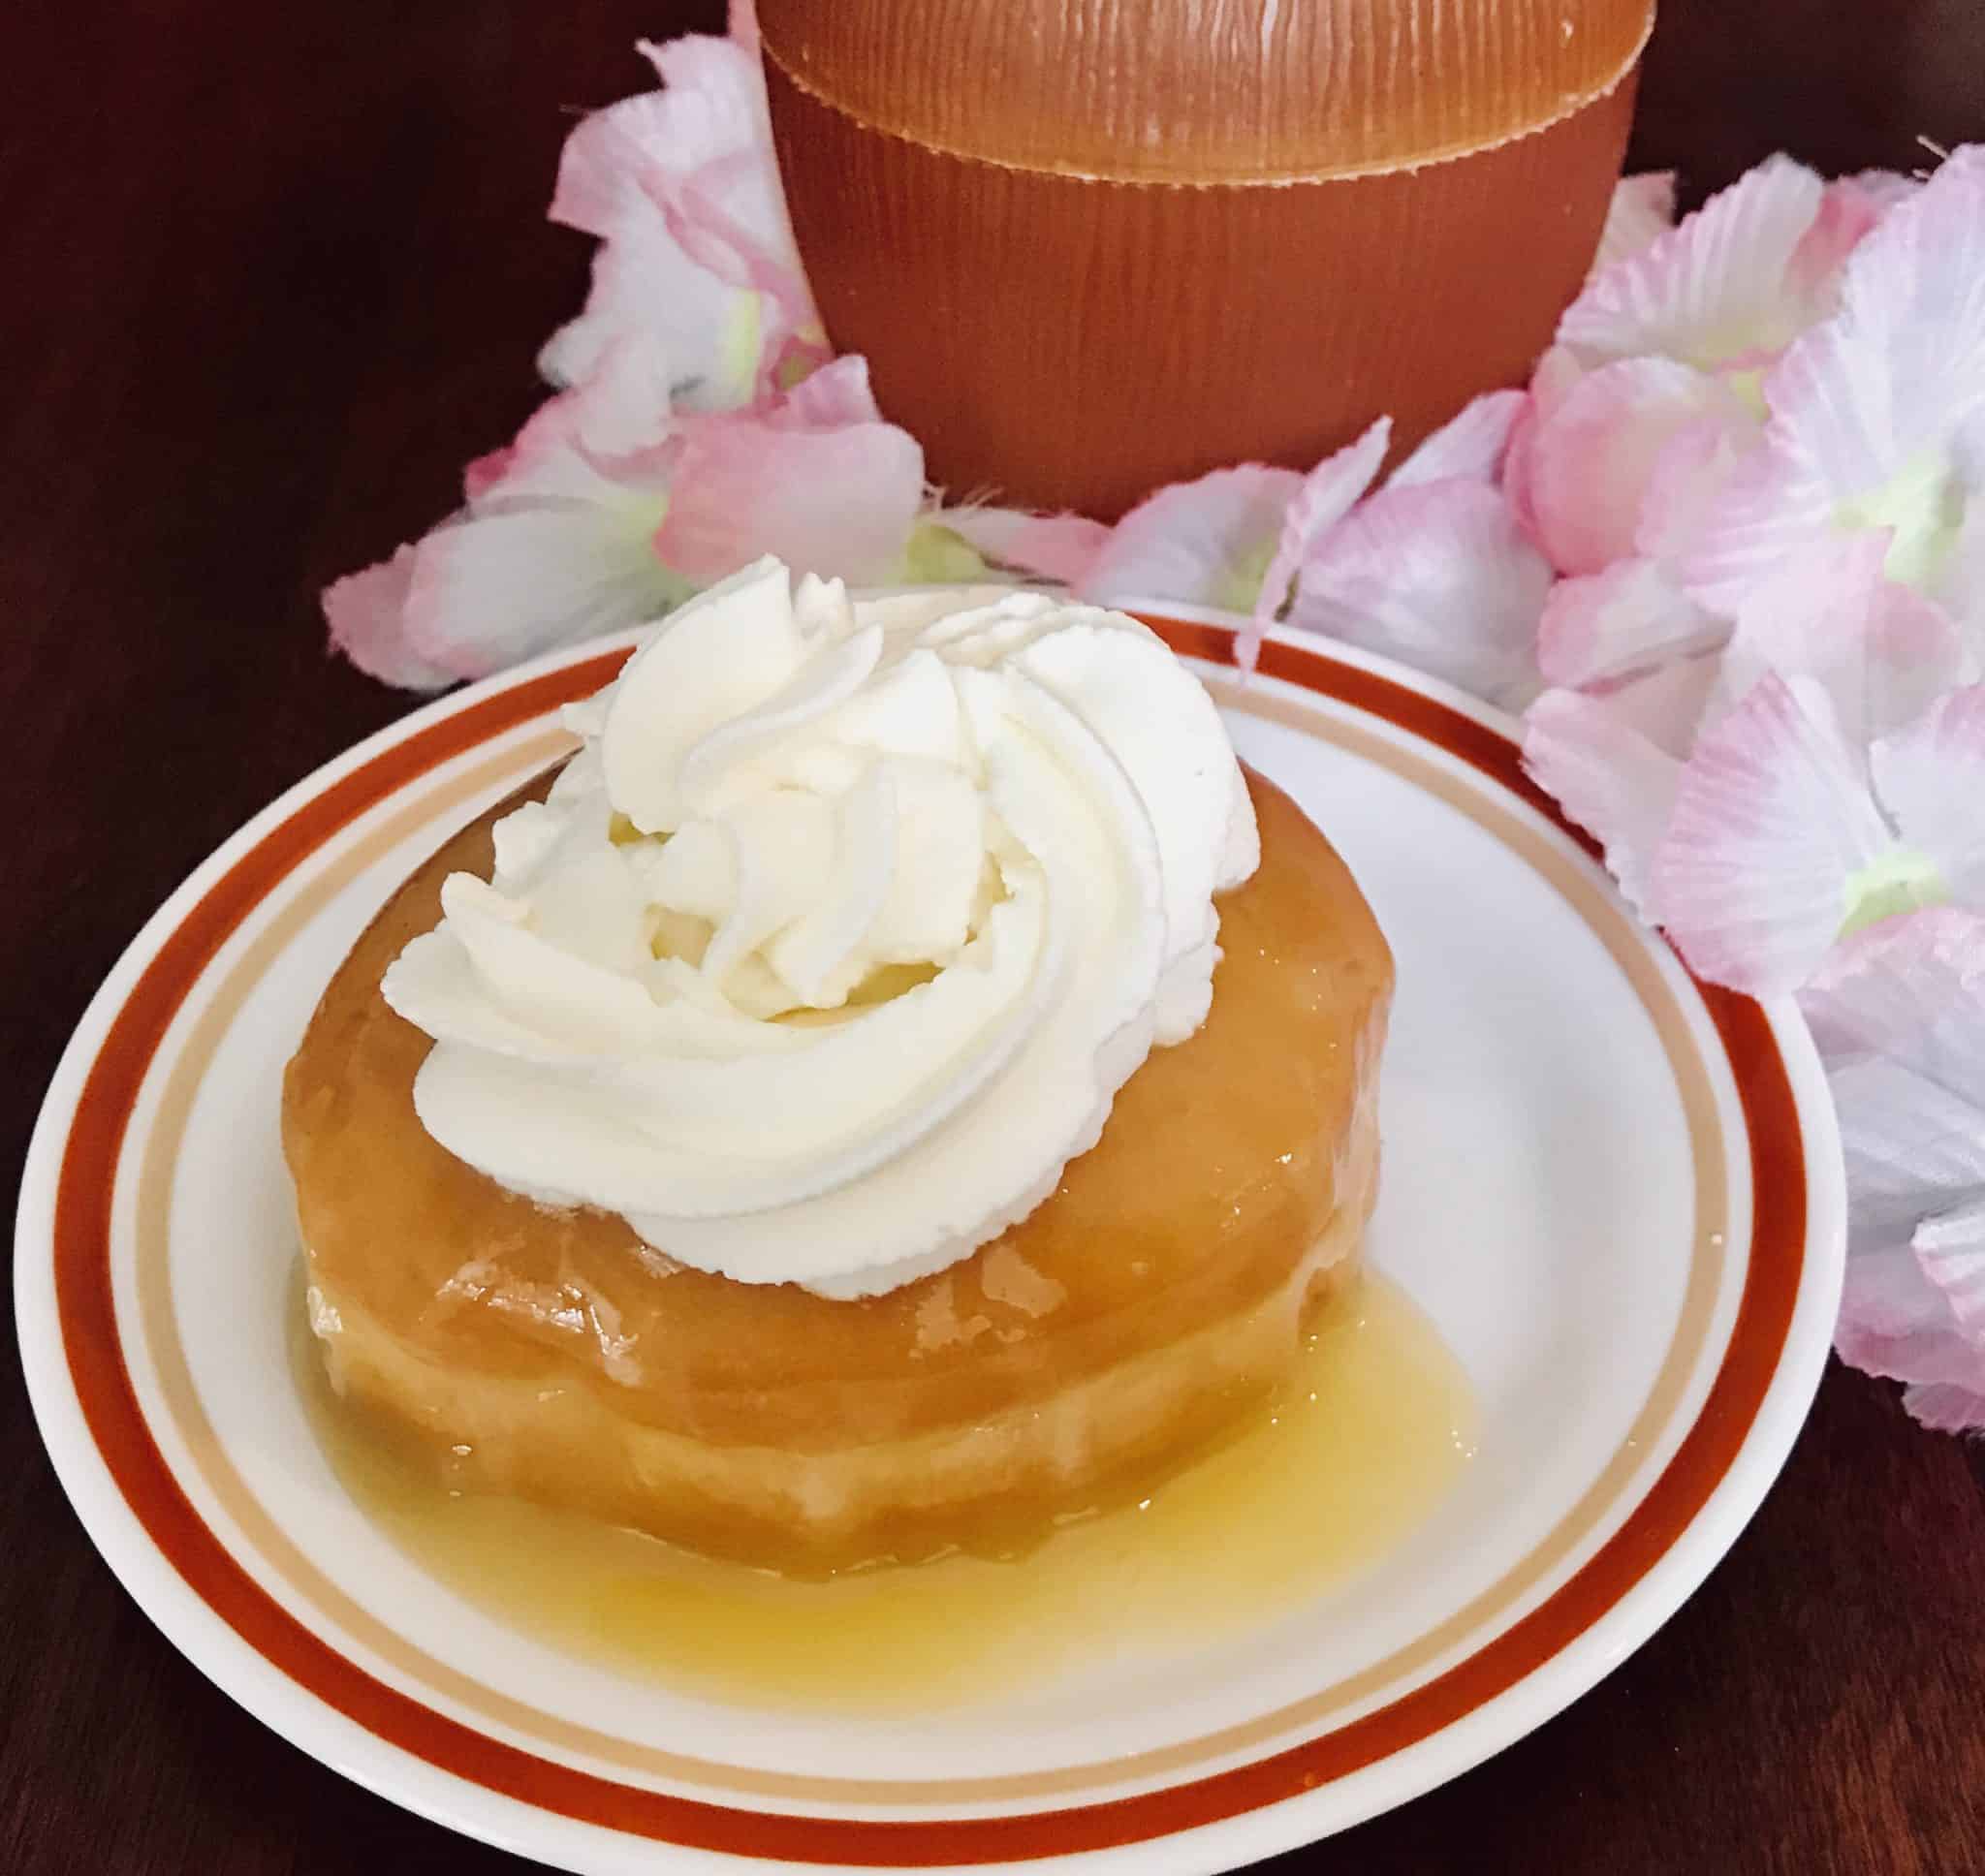 My-version-of-Pineapple-Dole-Whip-Donut